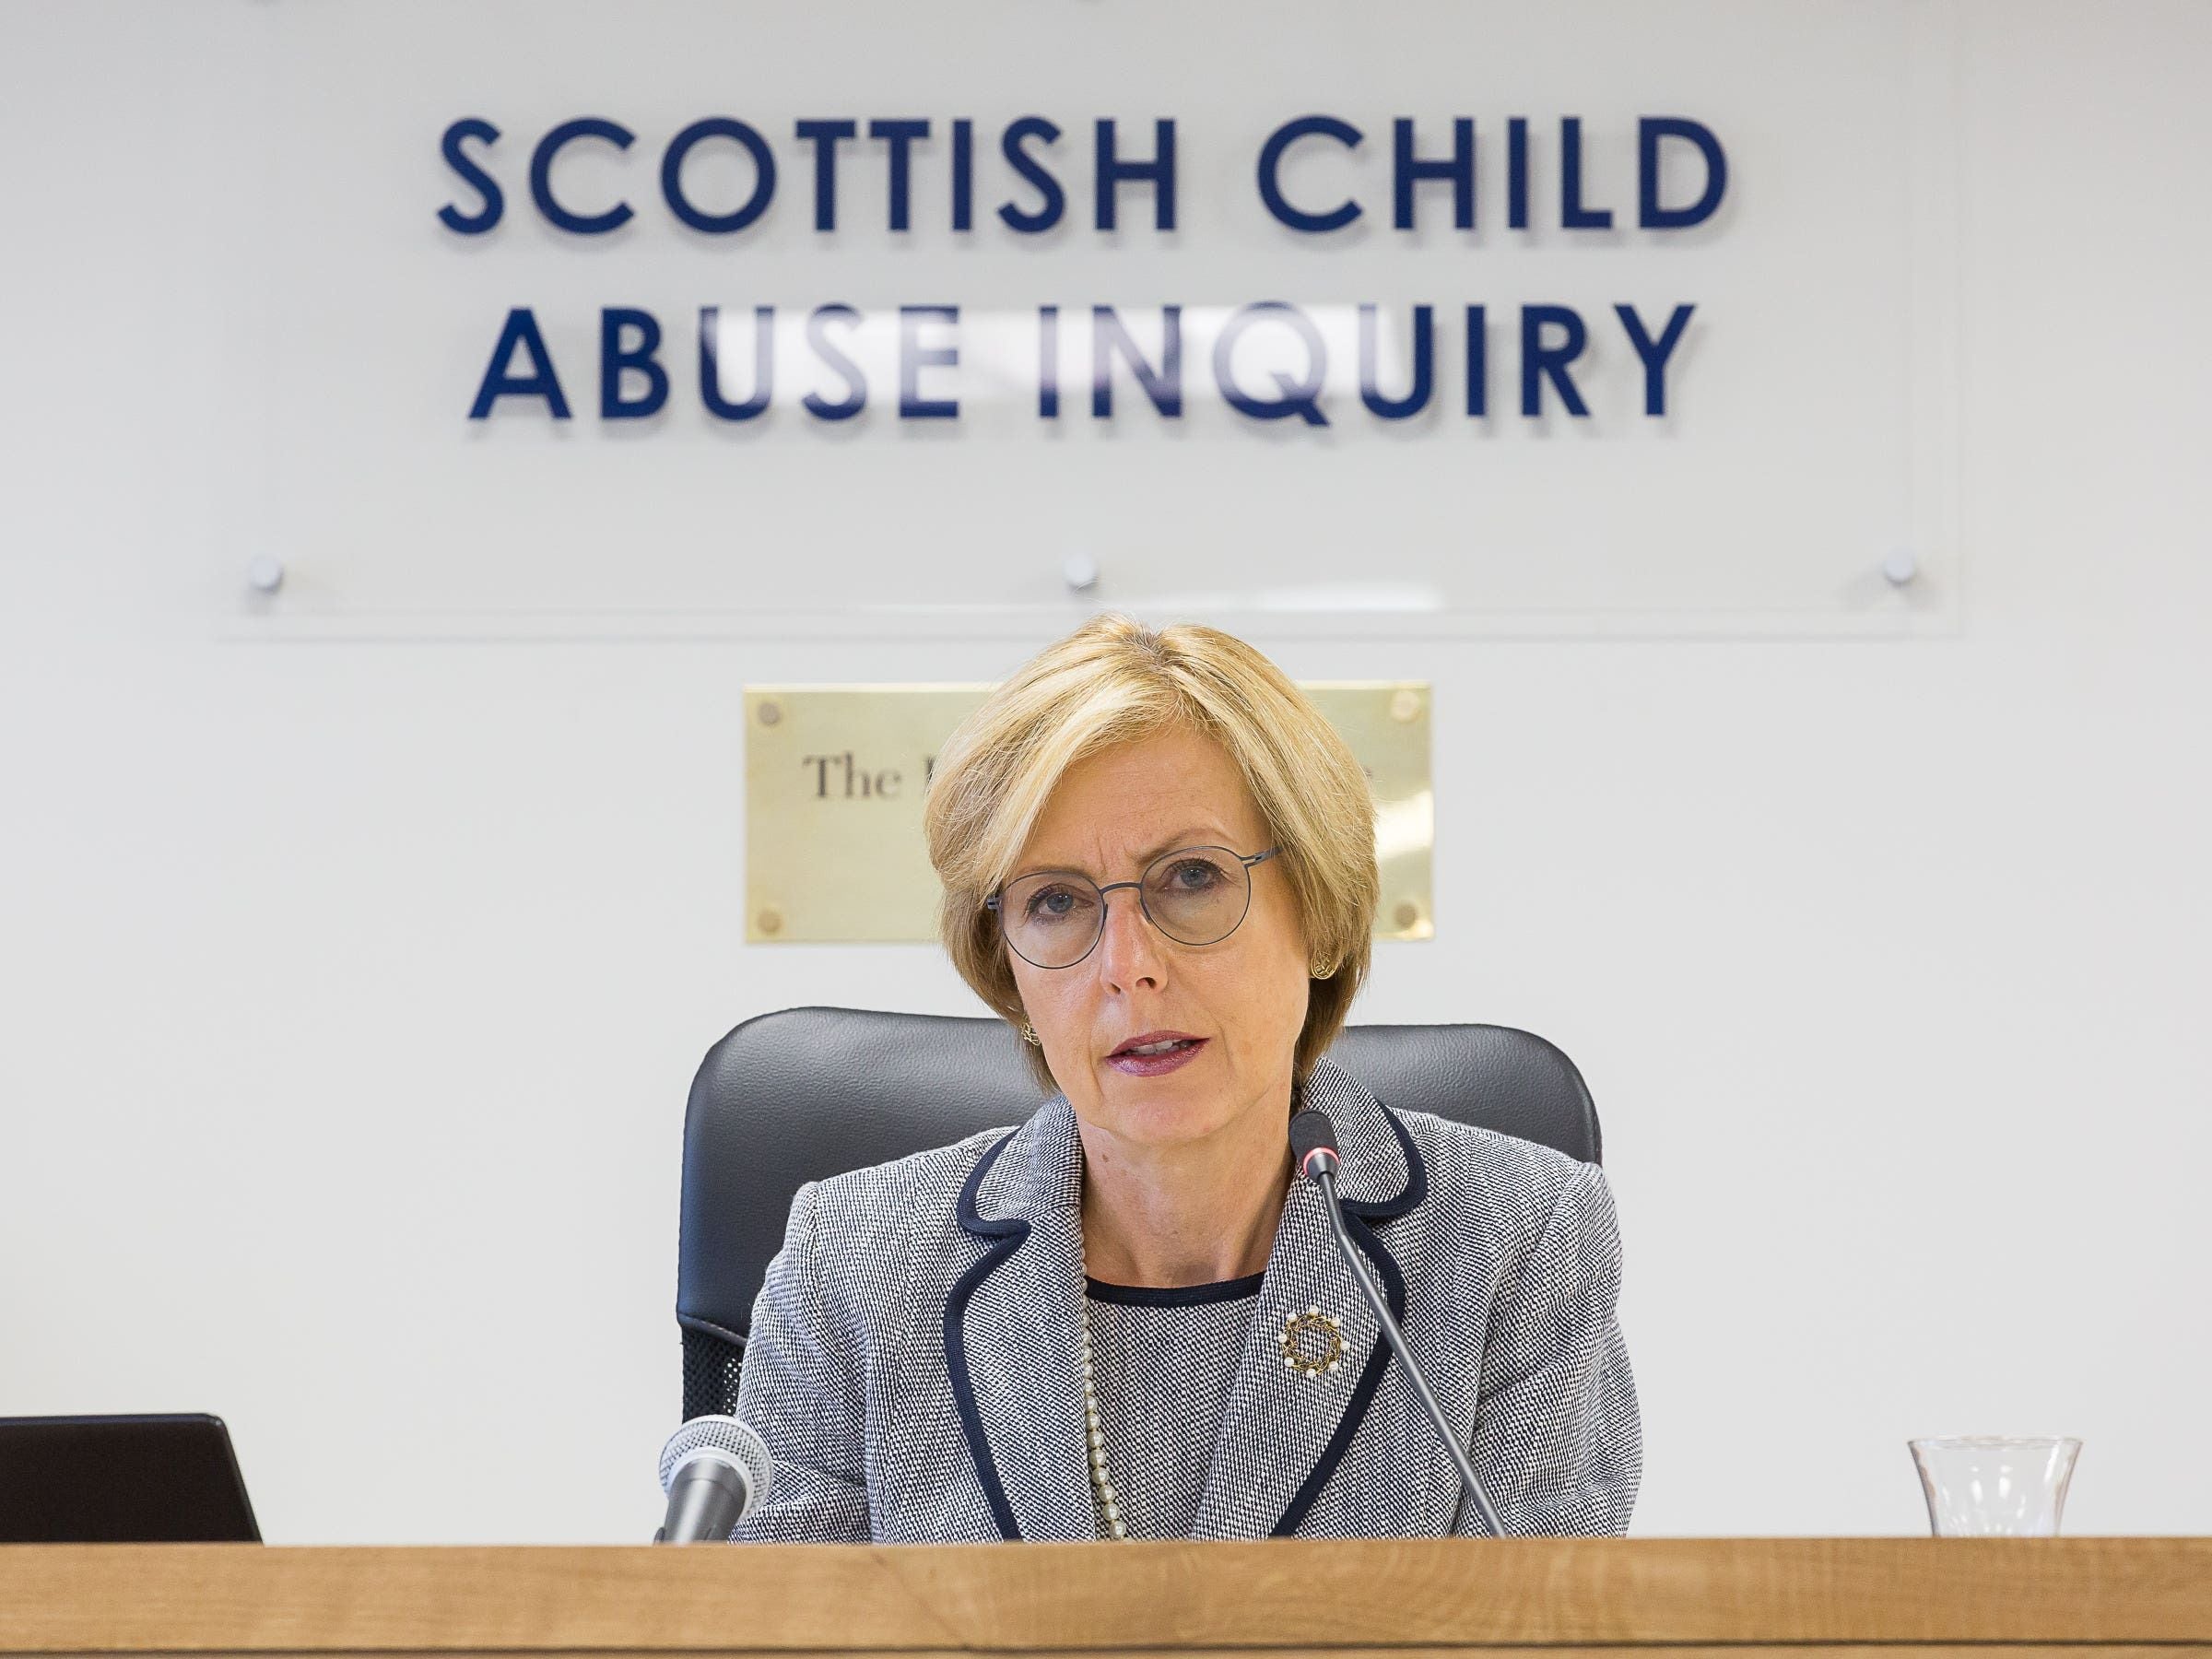 Children’s secure unit was ‘hellhole’ with frequent violence, inquiry told